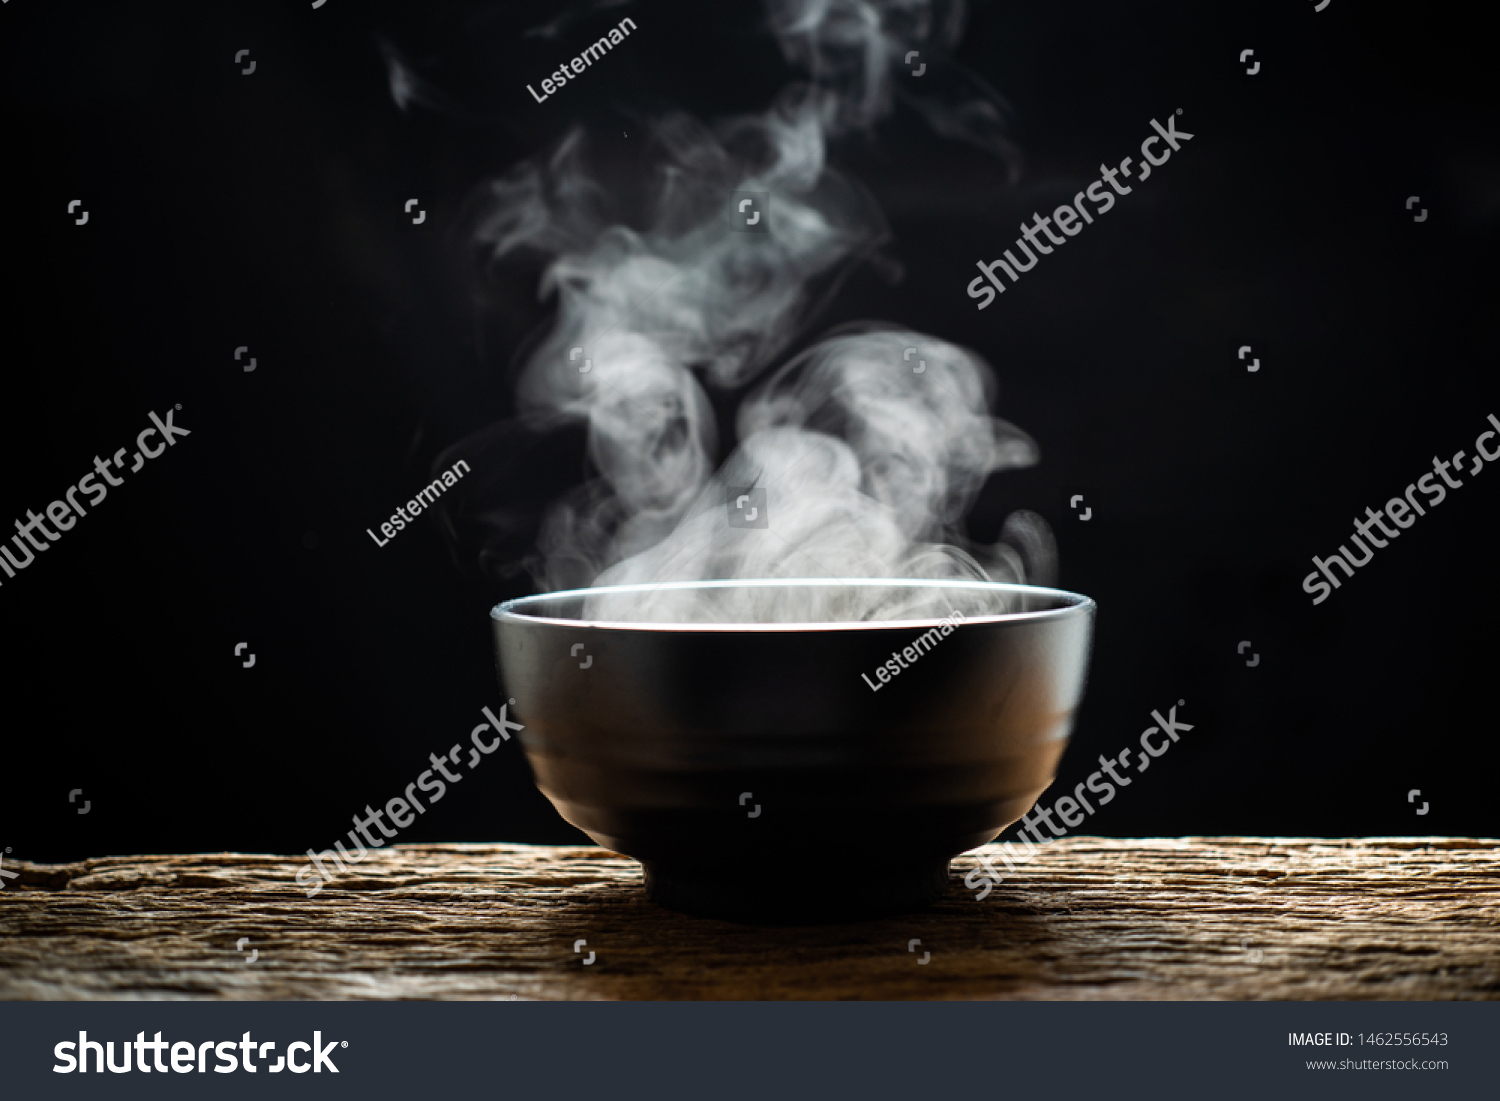 Steam of hot soup with smoke wood bowl on dark background.selective focus.hot food concept #1462556543